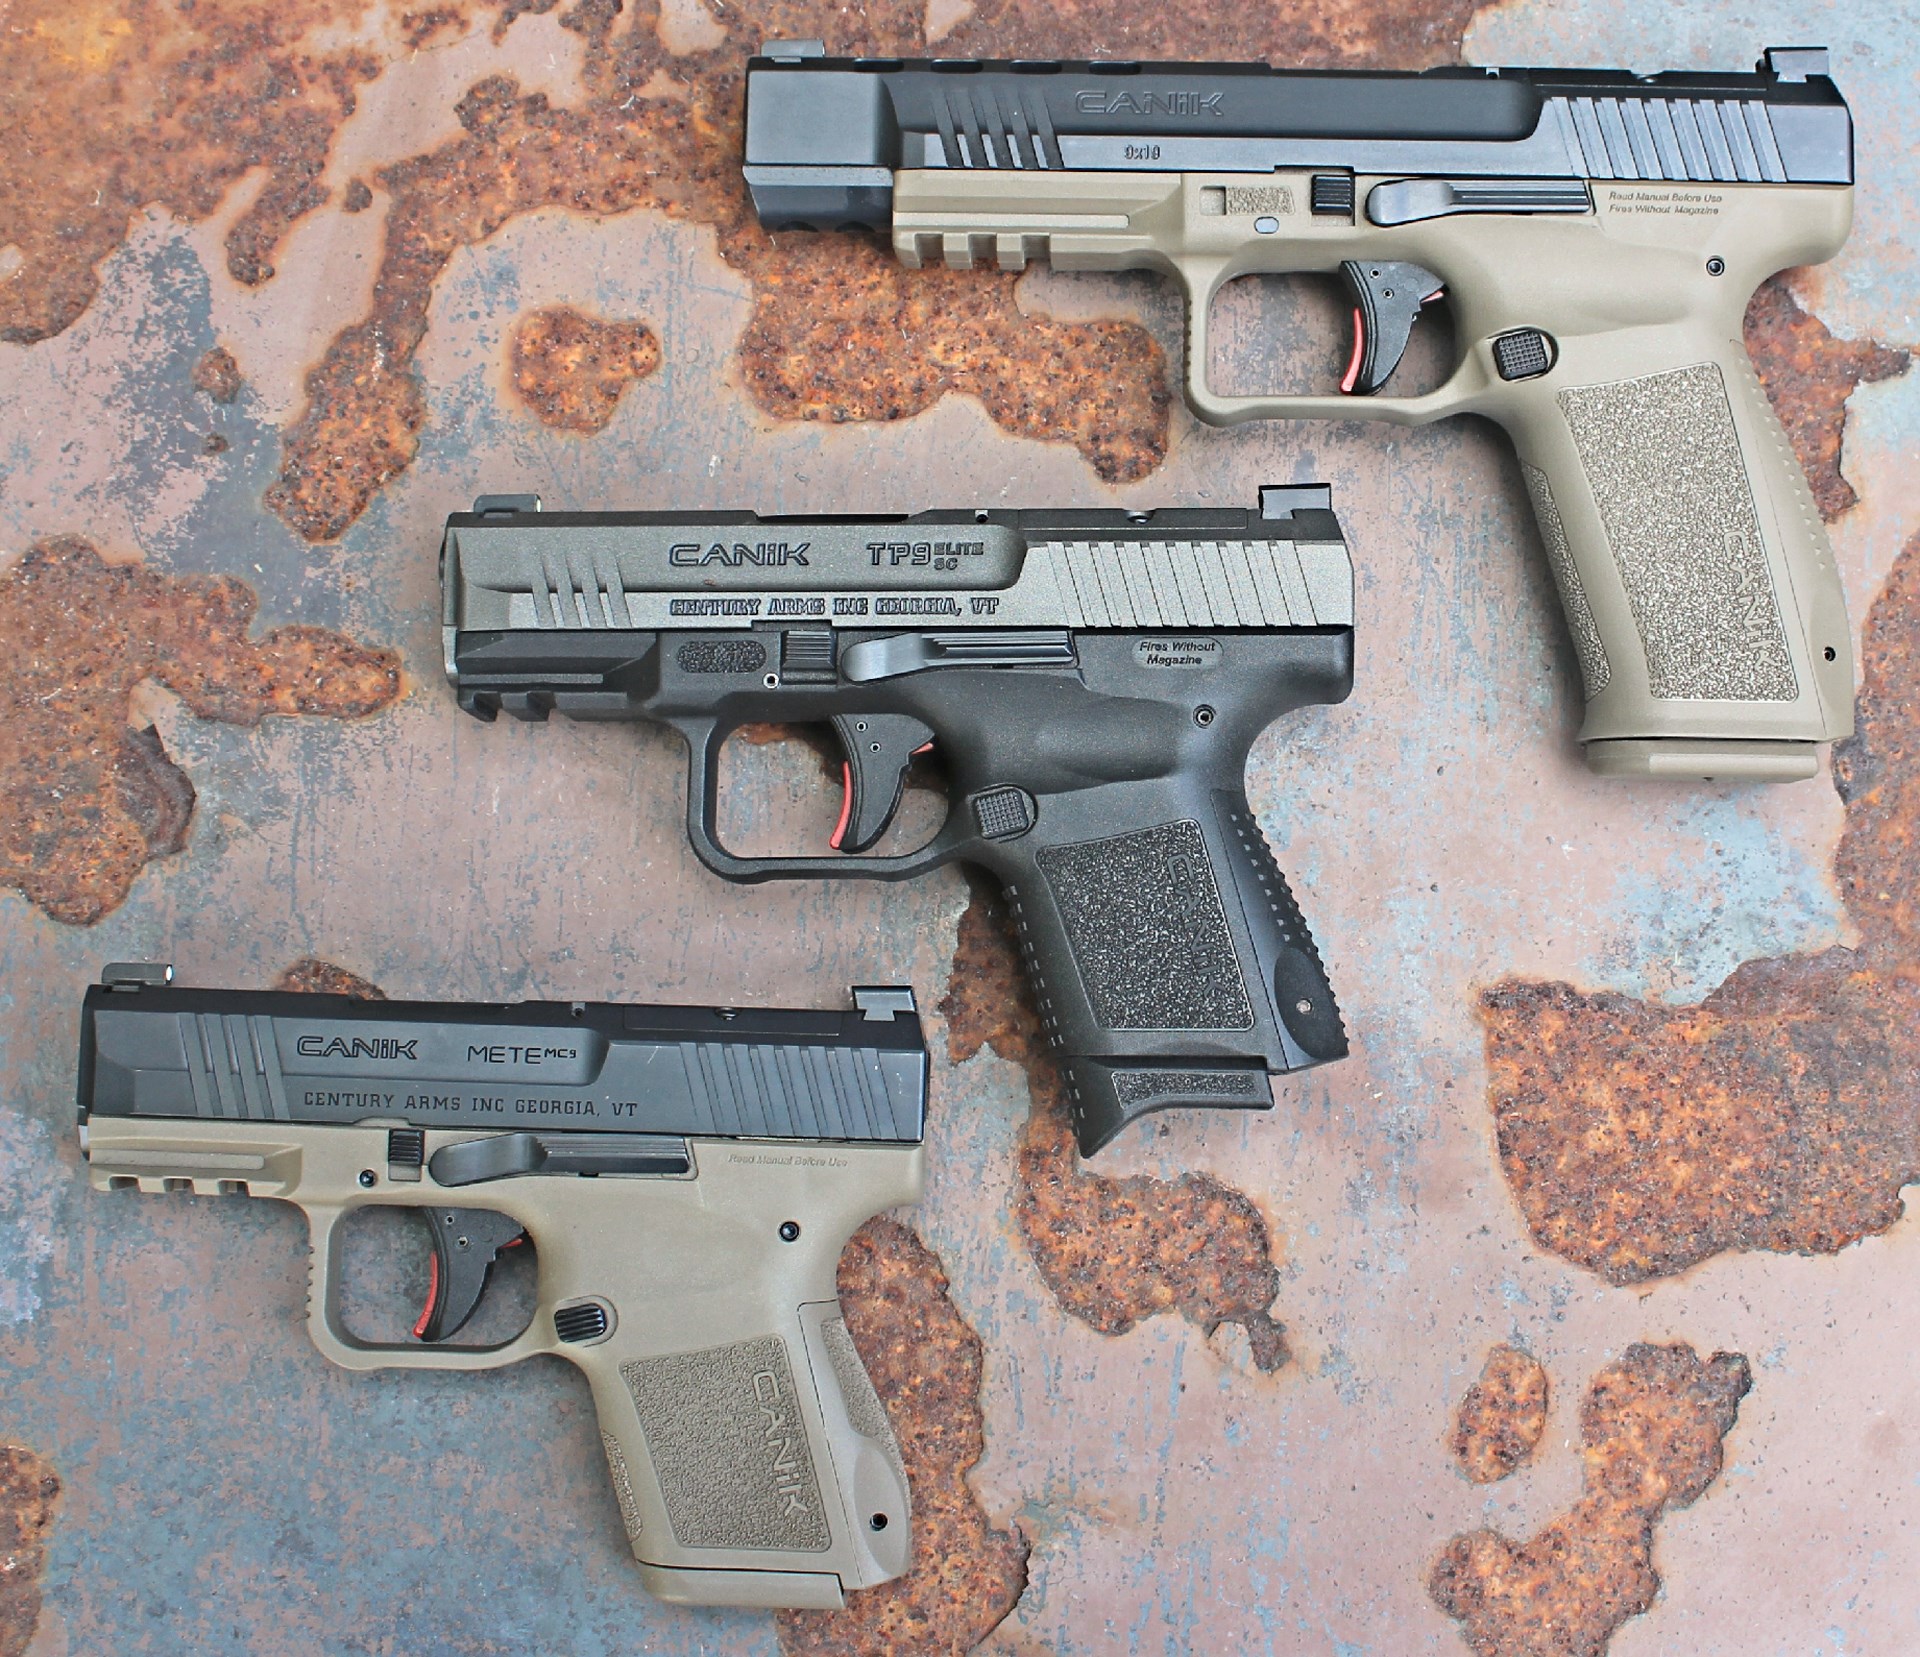 The Mete MC9 (Lower Left) compared to the compact TP9 Elite SC (Center) and the long-slide Mete SFx (Upper Right).